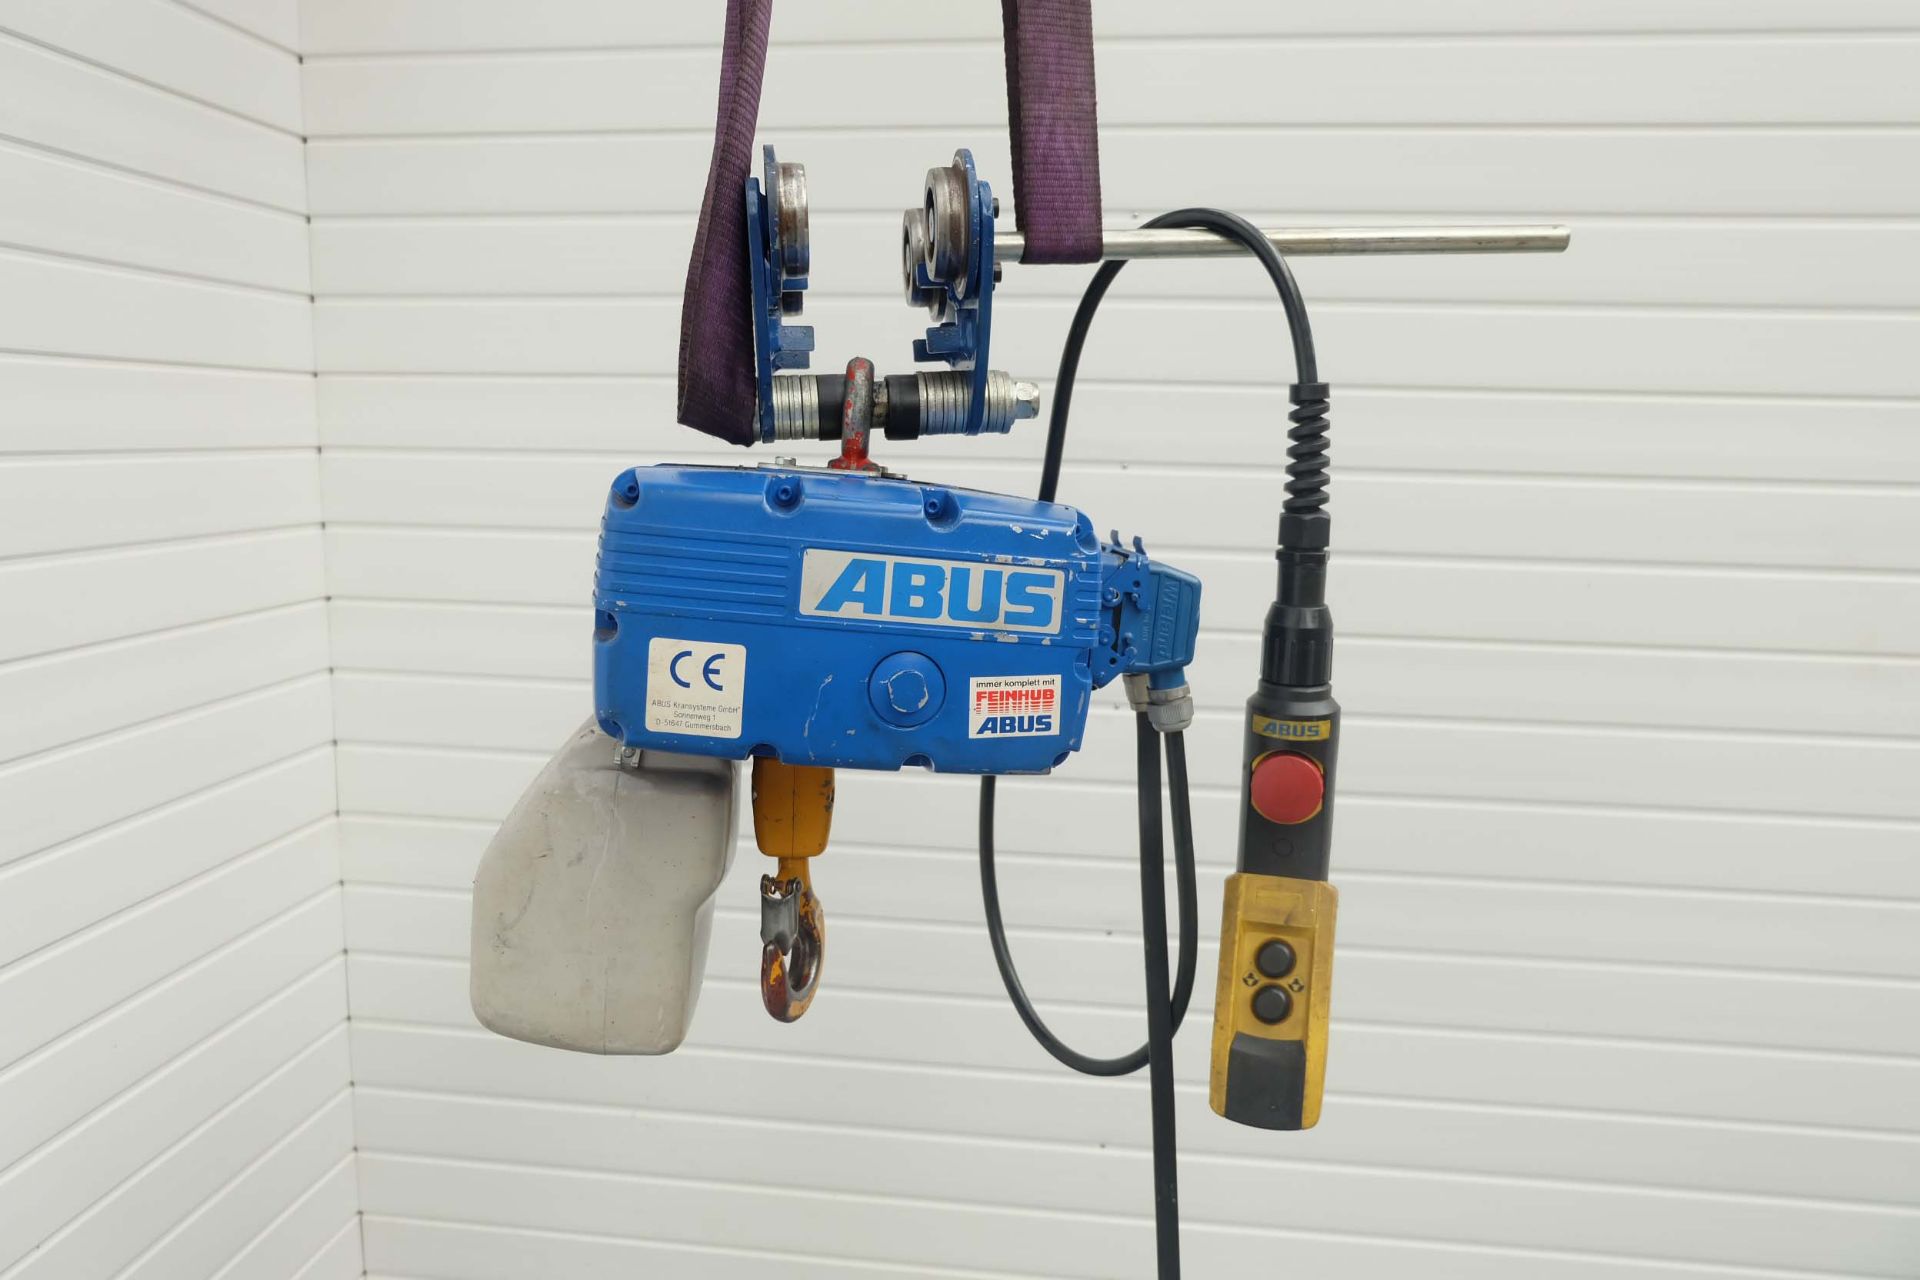 ABUS Type GM3 Electric Chain Hoist. 2 Speed With Pendant Control. Capacity 500kg. Year 1997.